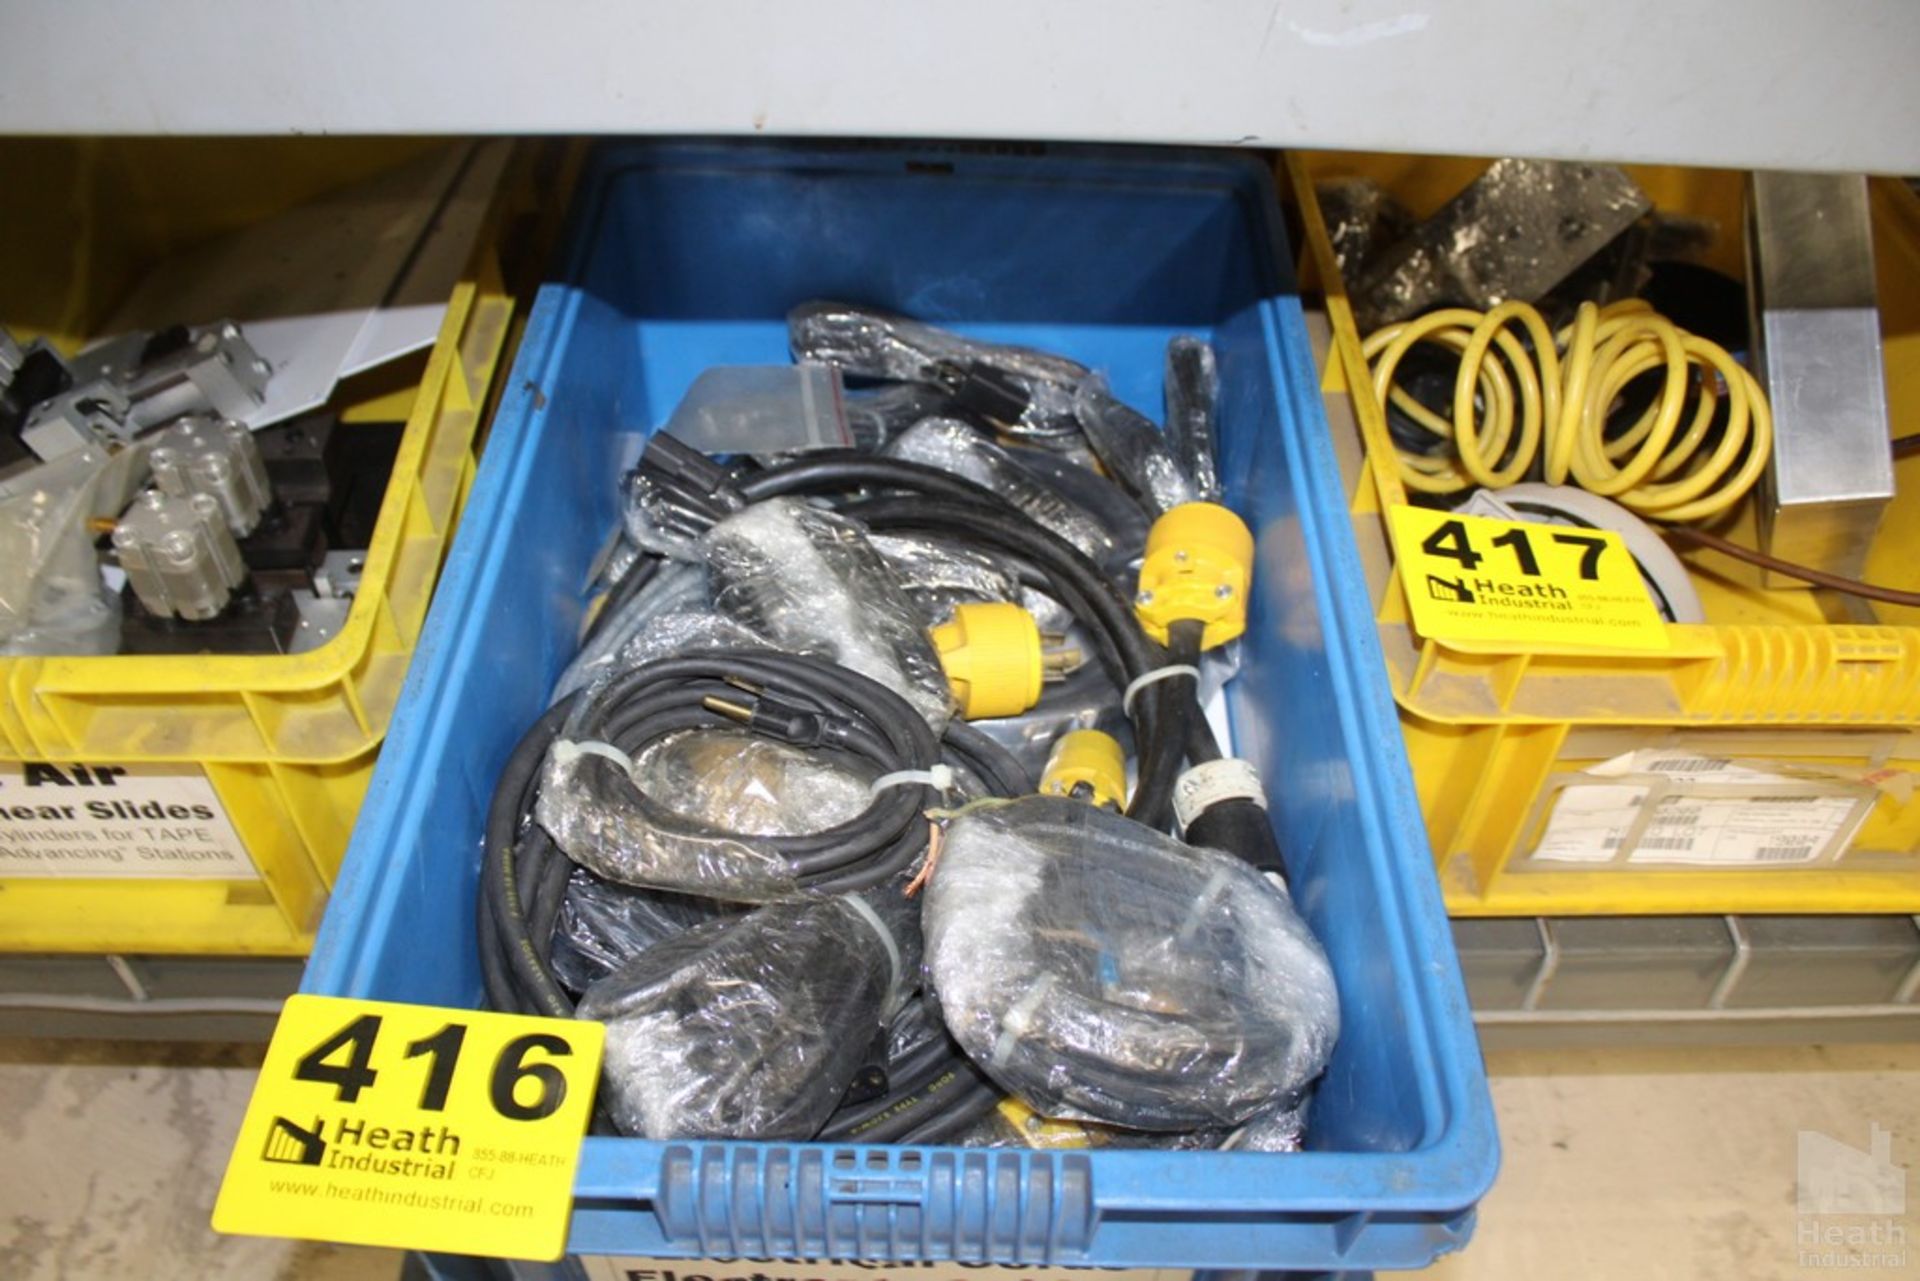 ASSORTED ELECTRICAL CORDS IN BIN